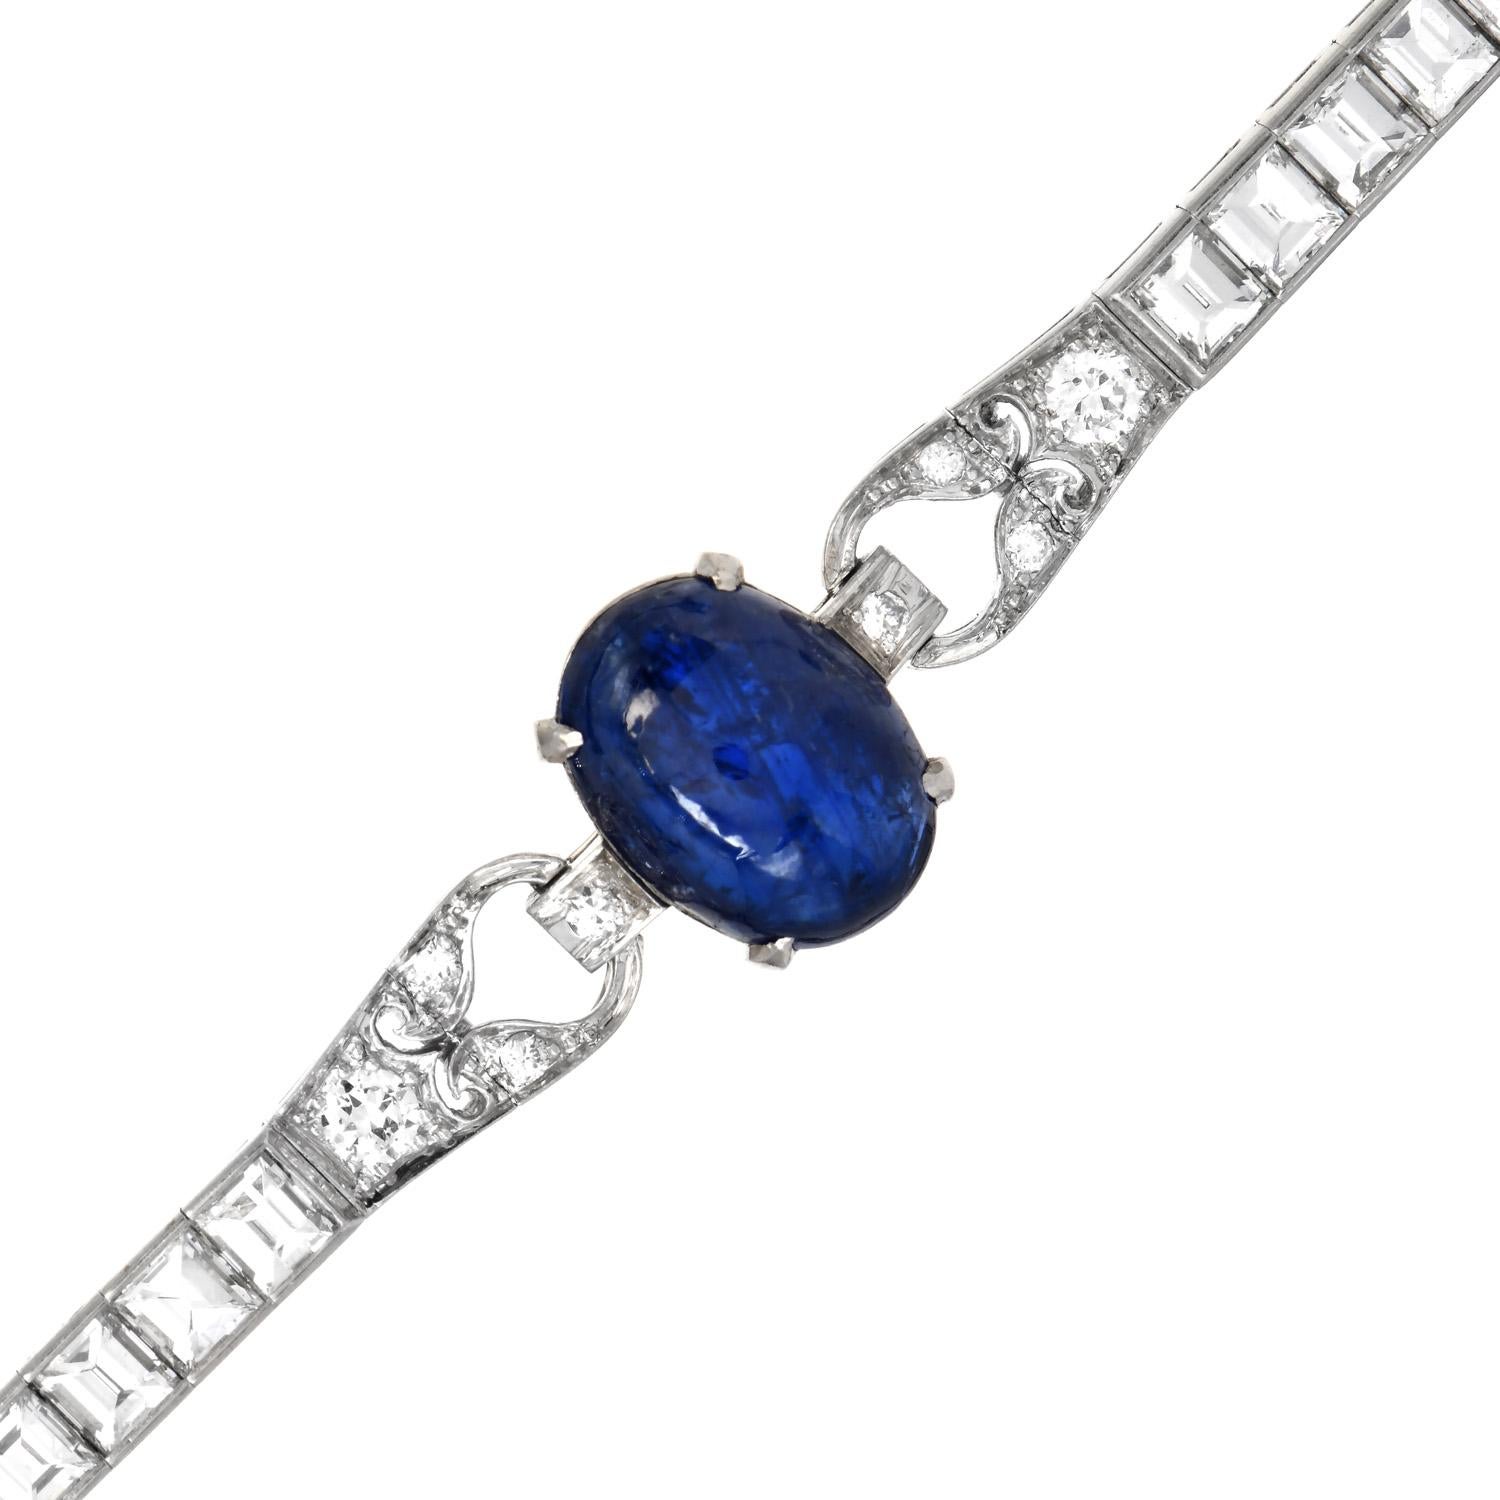 This Stunning Antique art deco bracelet with Cabochon Sapphire was crafted in luxurious Platinum. 

This 1920's piece is Covered in Diamonds from east to west and accented with three genuine cabochons oval-cut Blue Sapphires, prong-set, weighing in